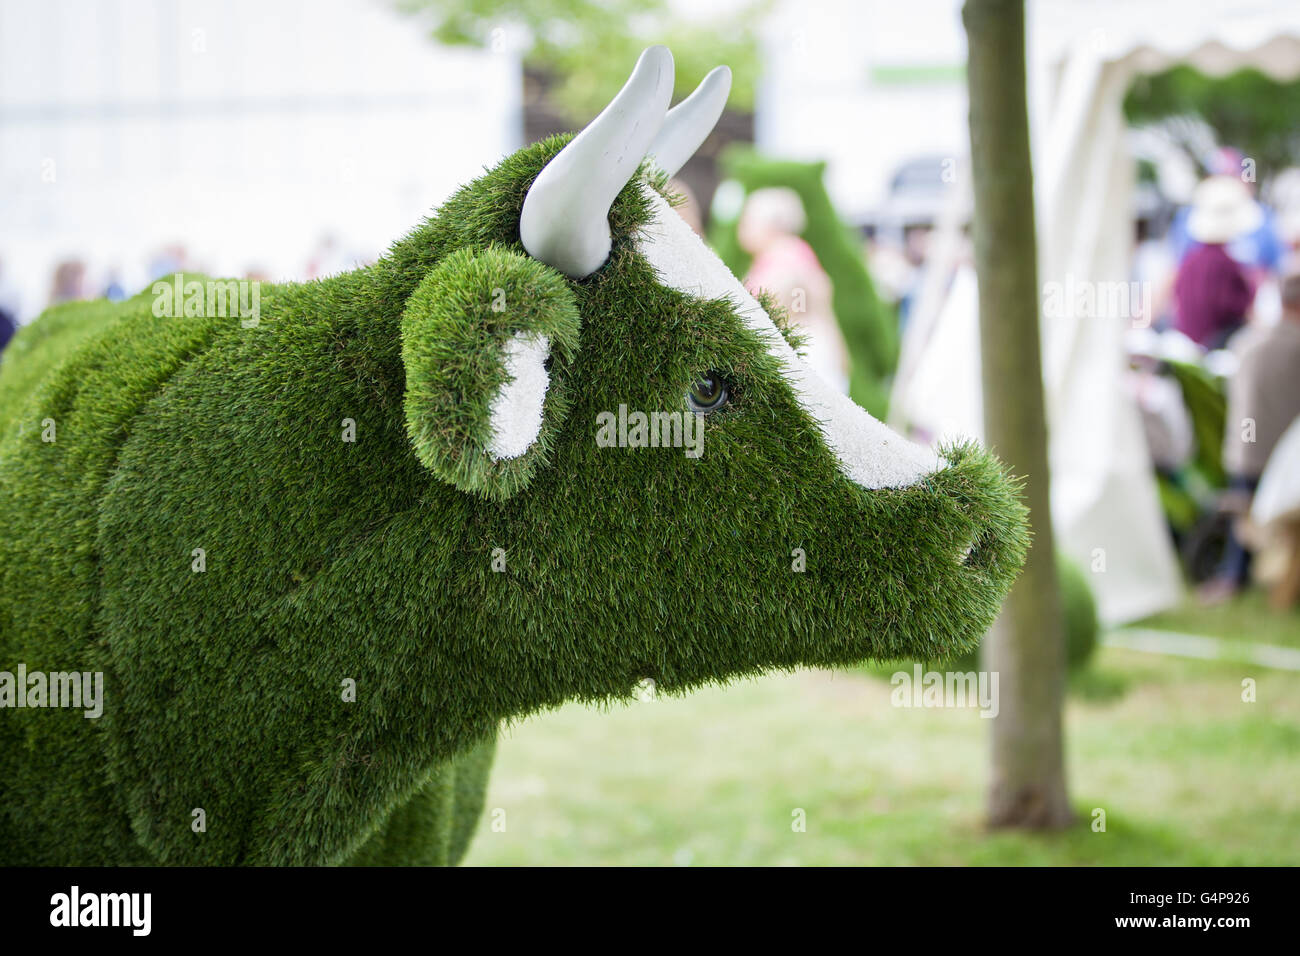 Birmingham, UK. 19th June, 2016.  A Cow made of synthetic grass on display for the public Credit:  steven roe/Alamy Live News Stock Photo